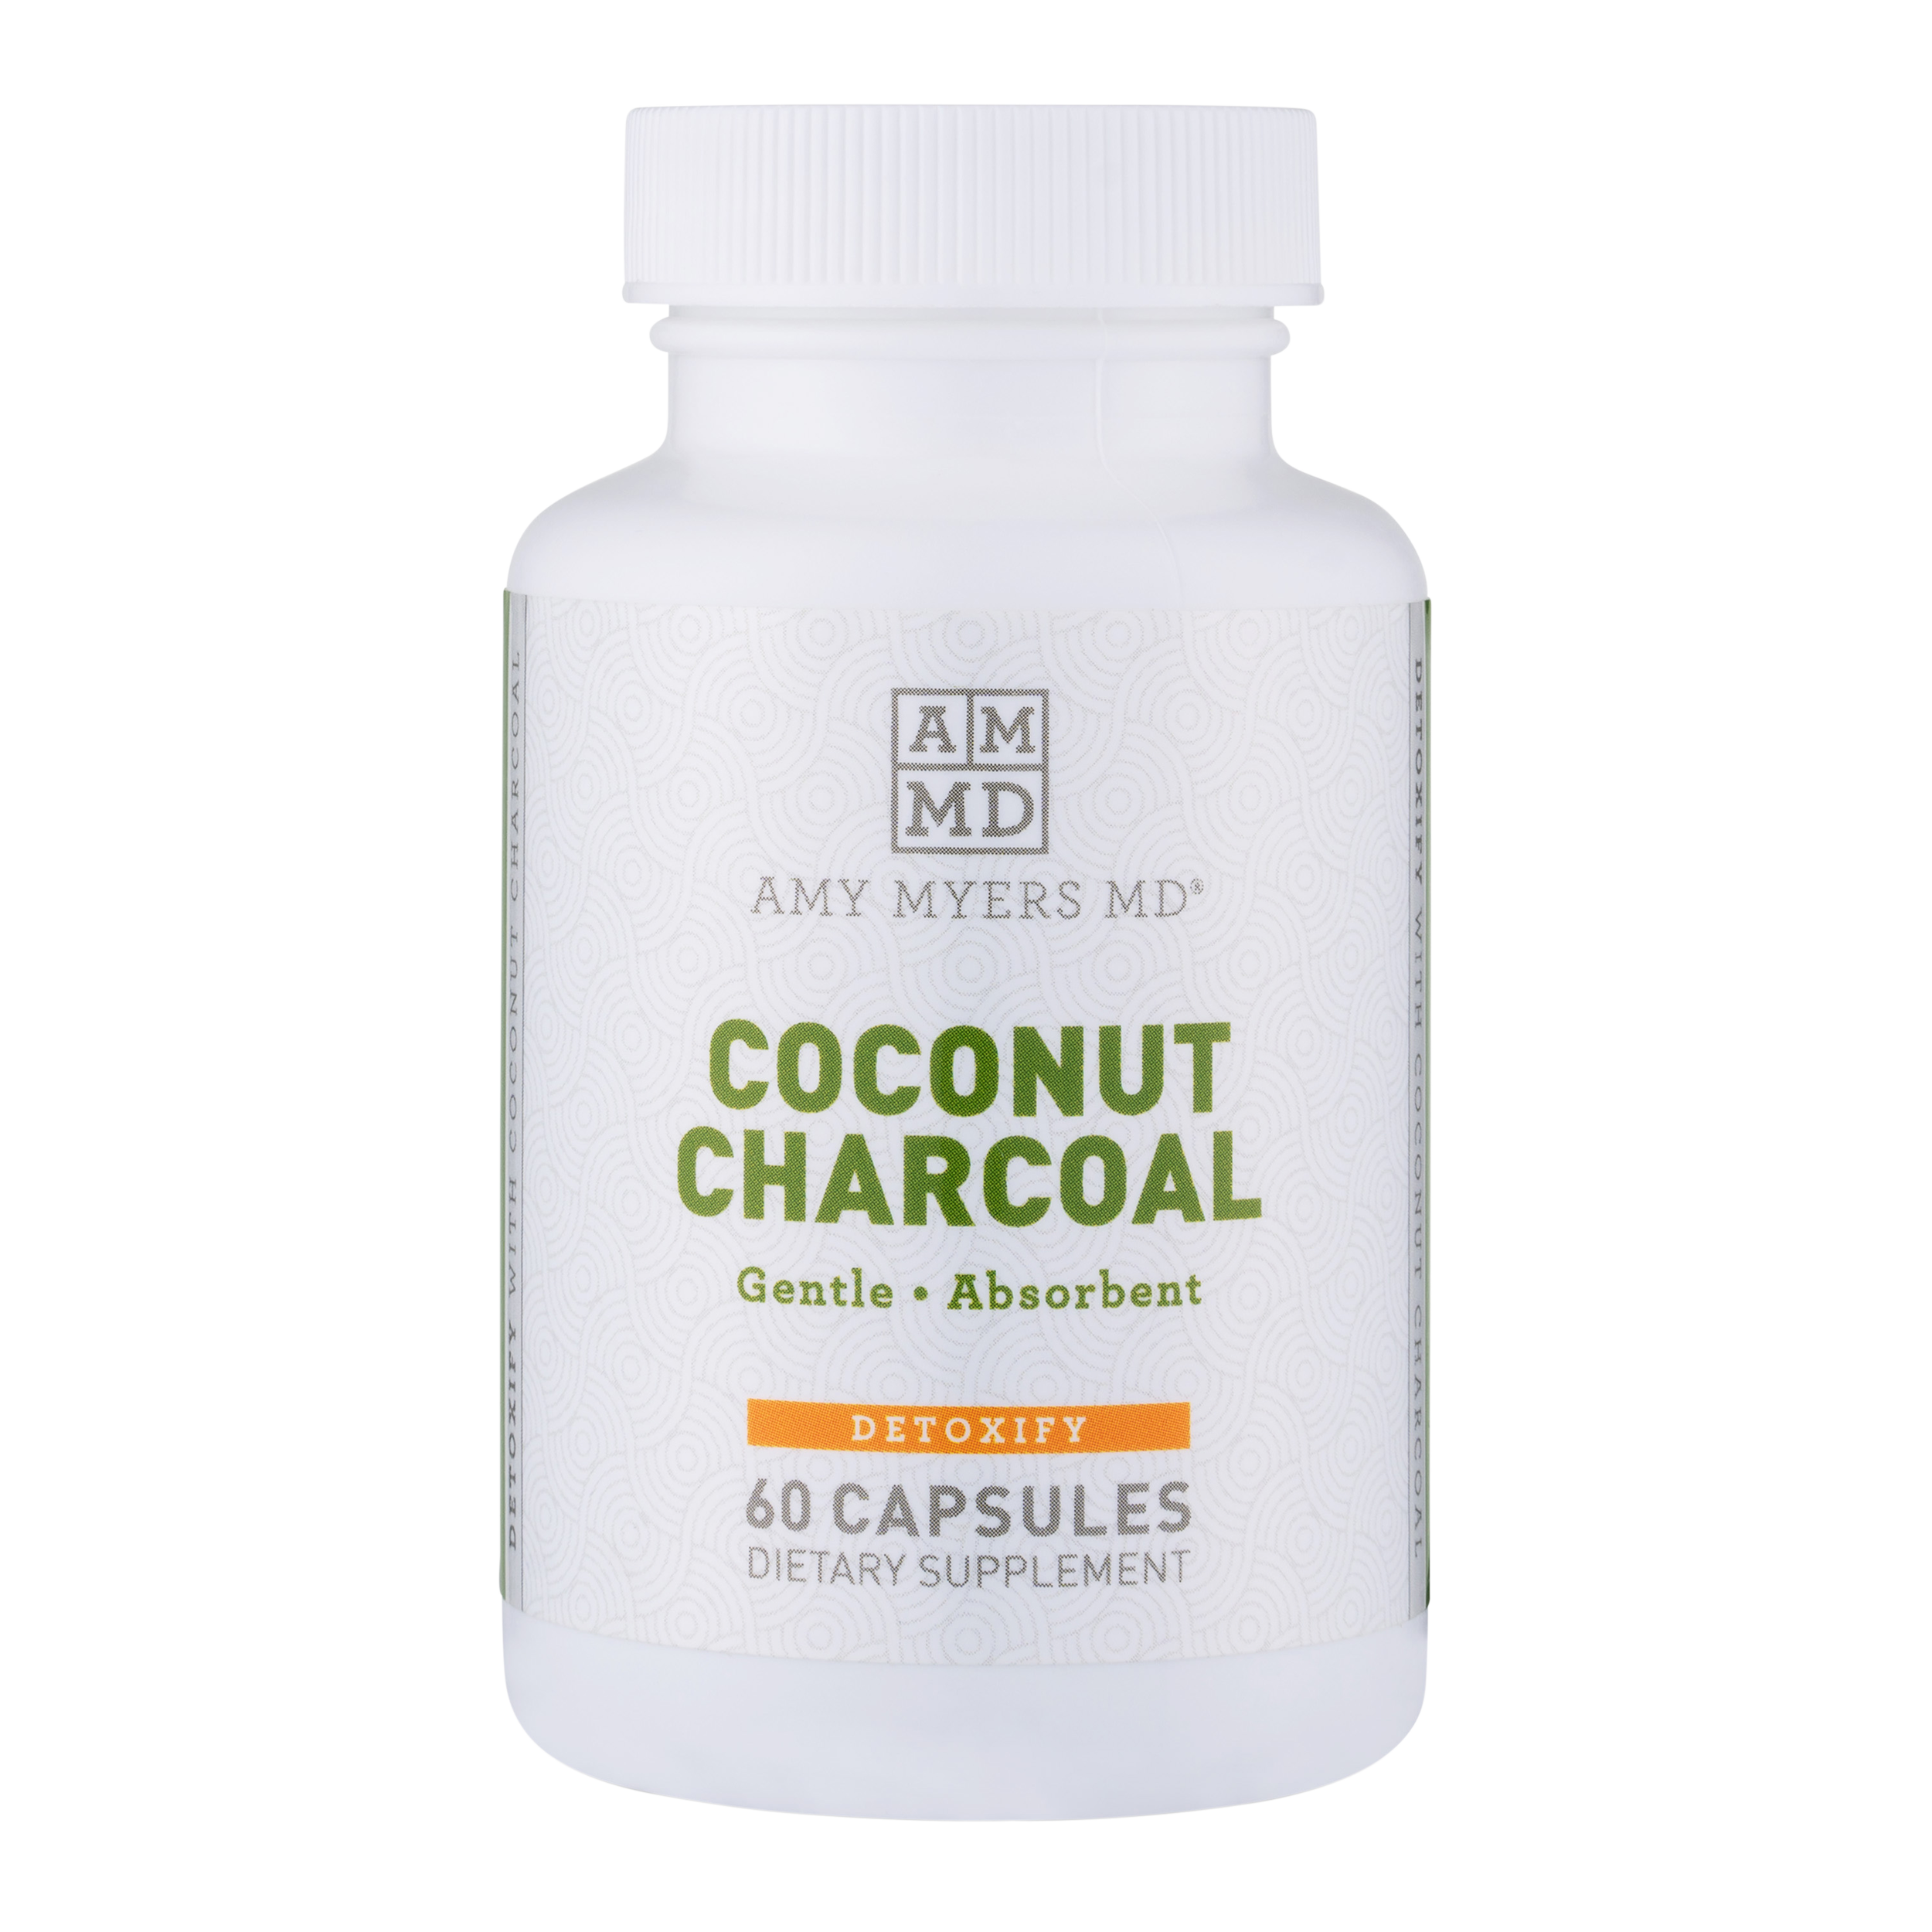 Coconut Charcoal - 60 Capsules | Amy Myers MD